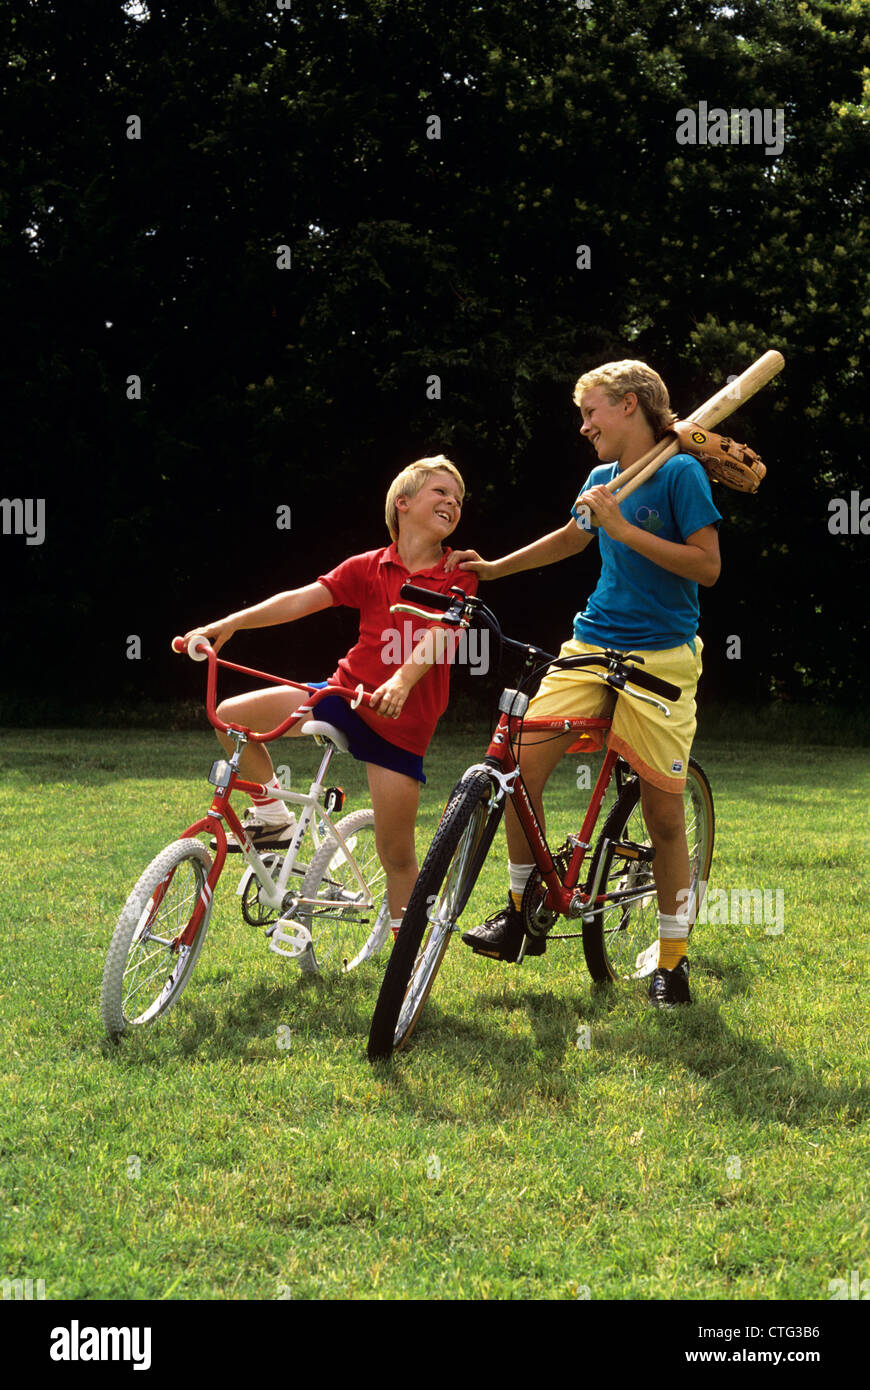 1980s 1990s JUVENILE BOY AND TEENAGE BOY ON BICYCLES WITH BASEBALL BAT AND GLOVE Stock Photo